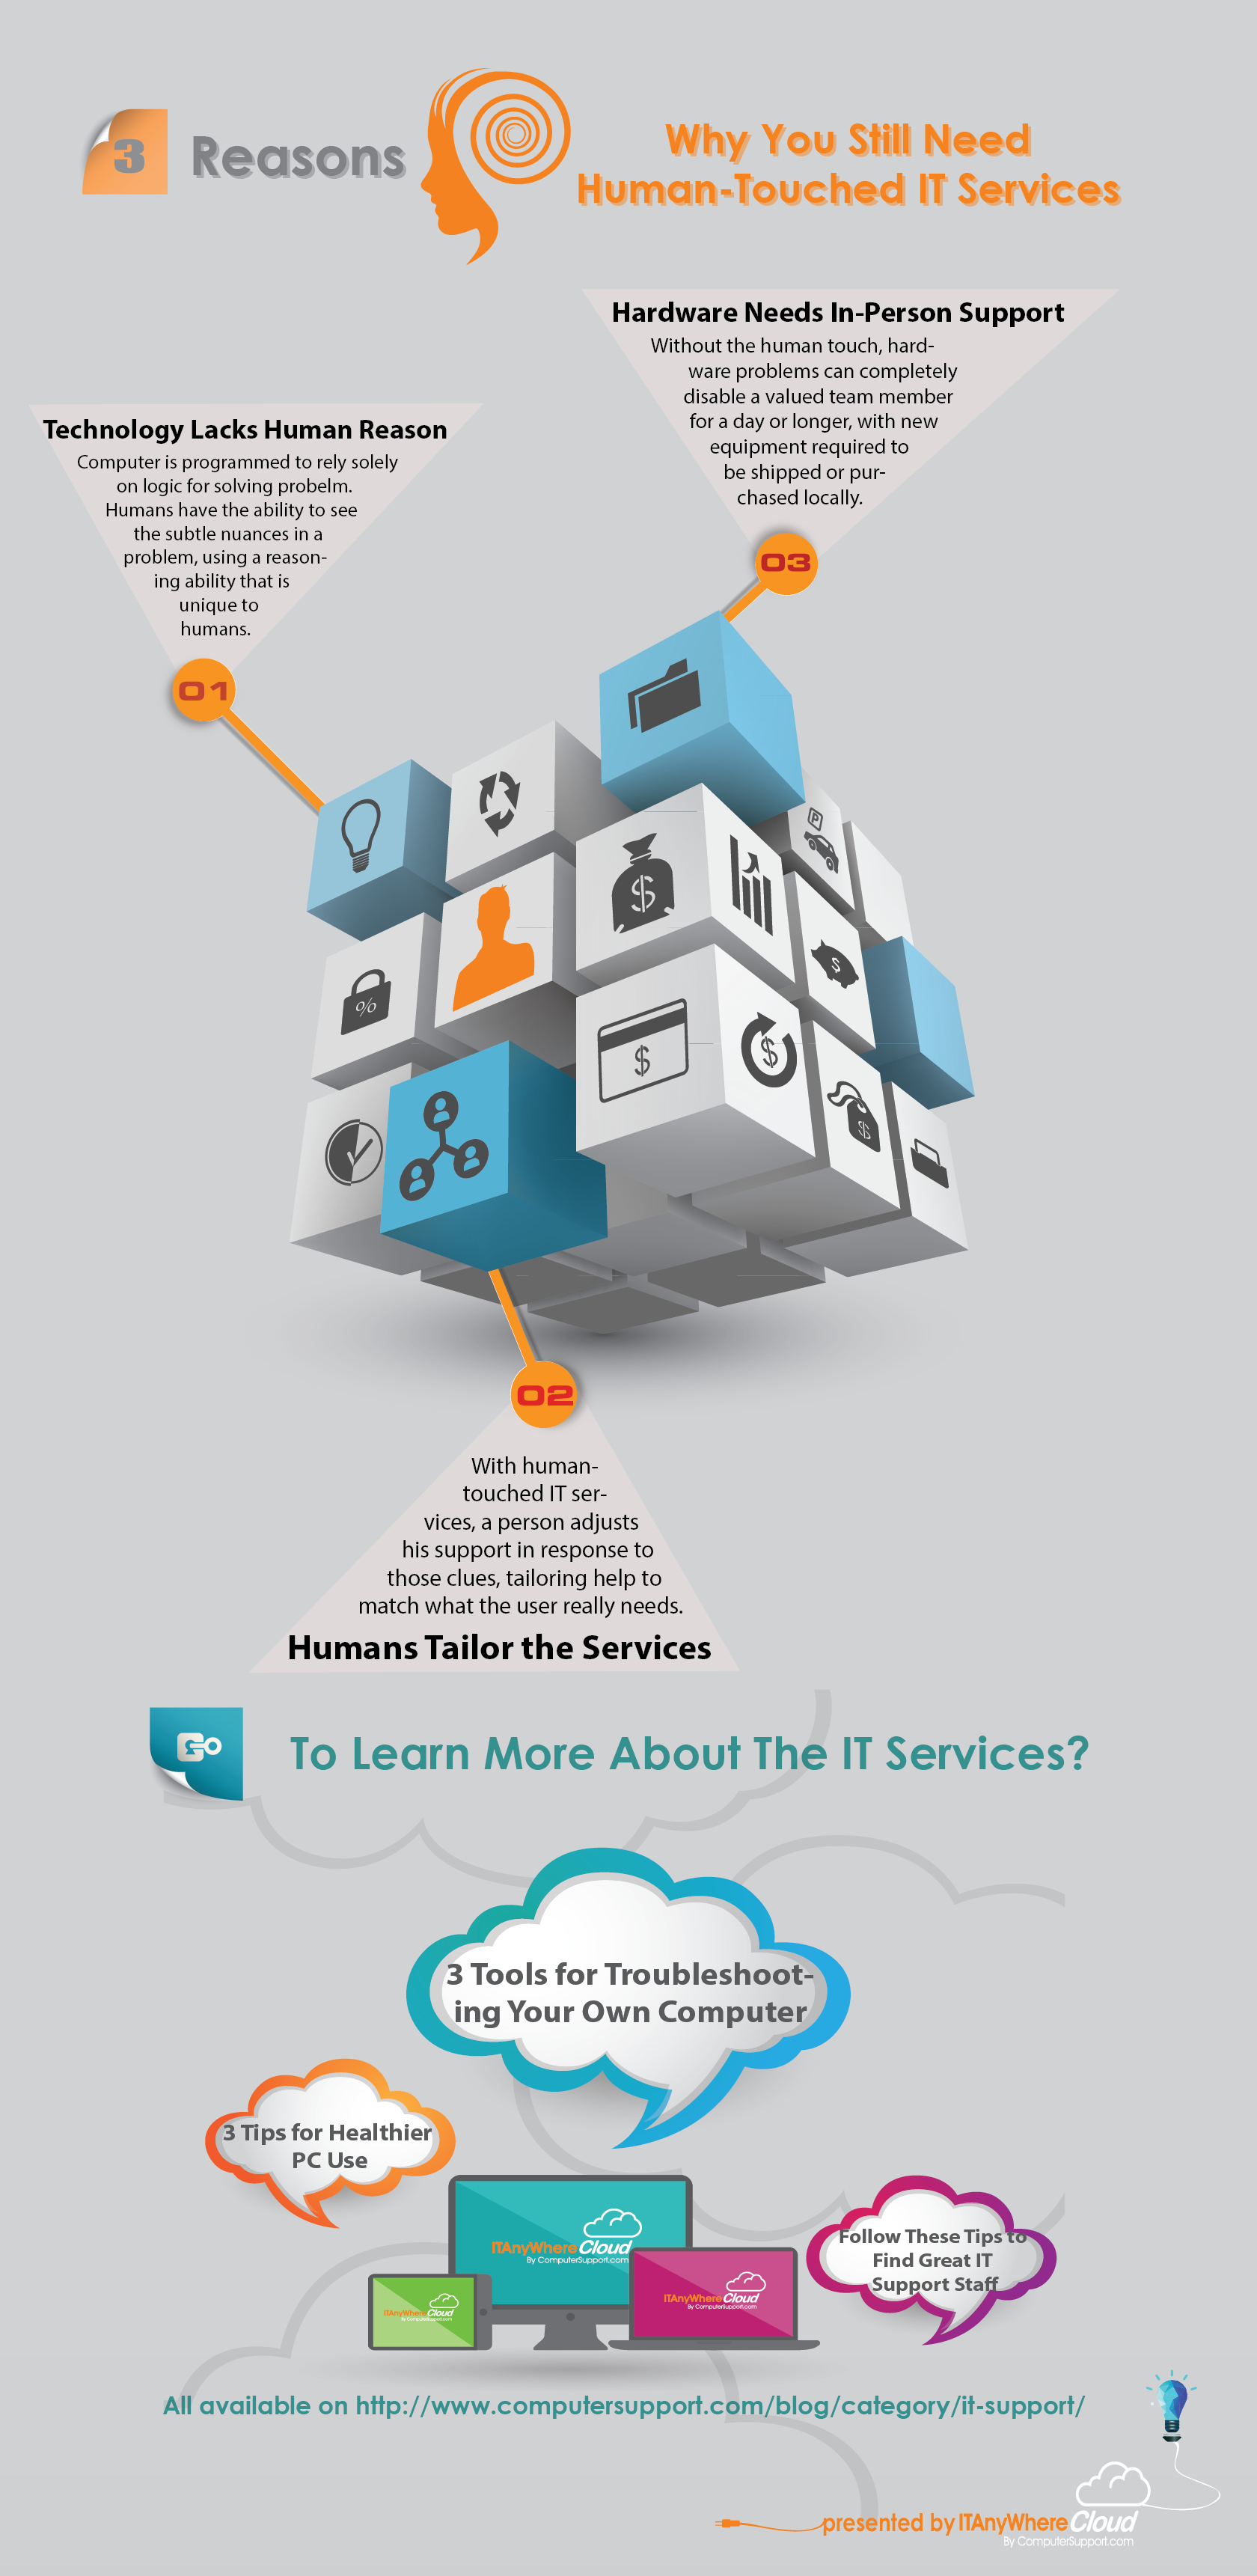 Human-touched IT services_Sep 22, 2014